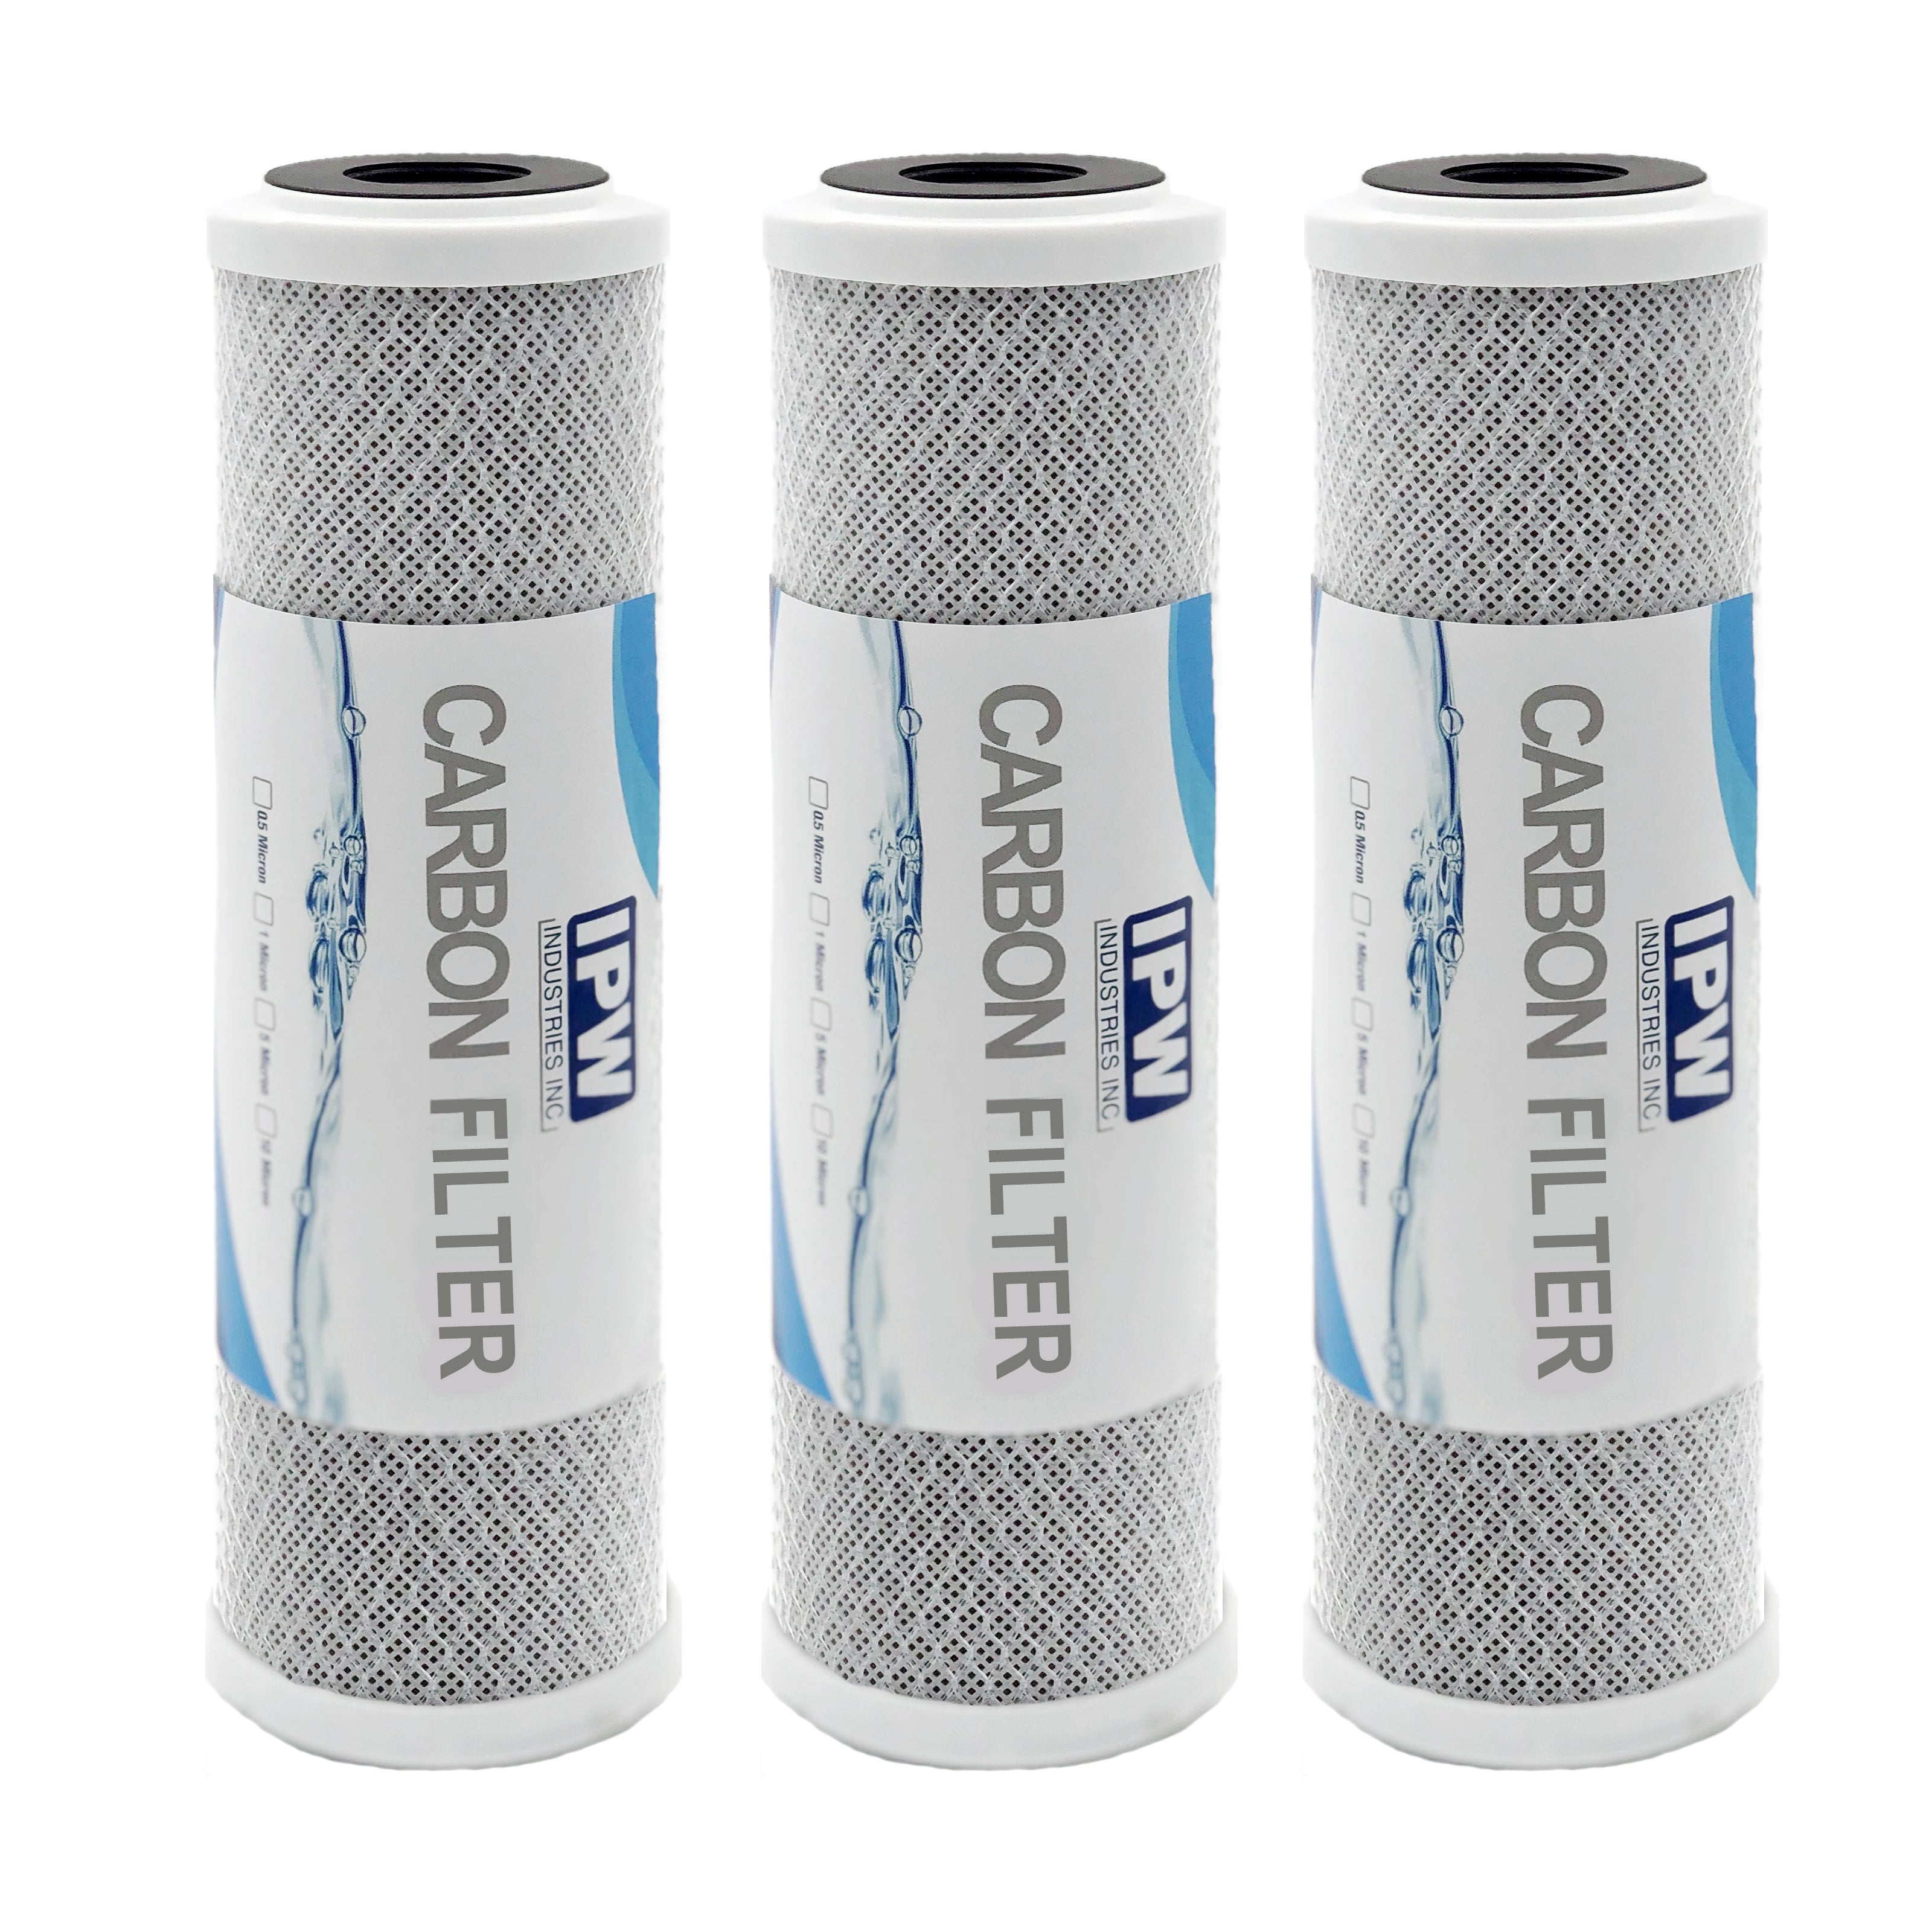 Compatible For Kenmore Lead-taste And Odor Compatible Filter Cartridges Kenmore 42 34377 - 42 34370 Pack Of 3 - Made In Usa By Ipw Industries Inc